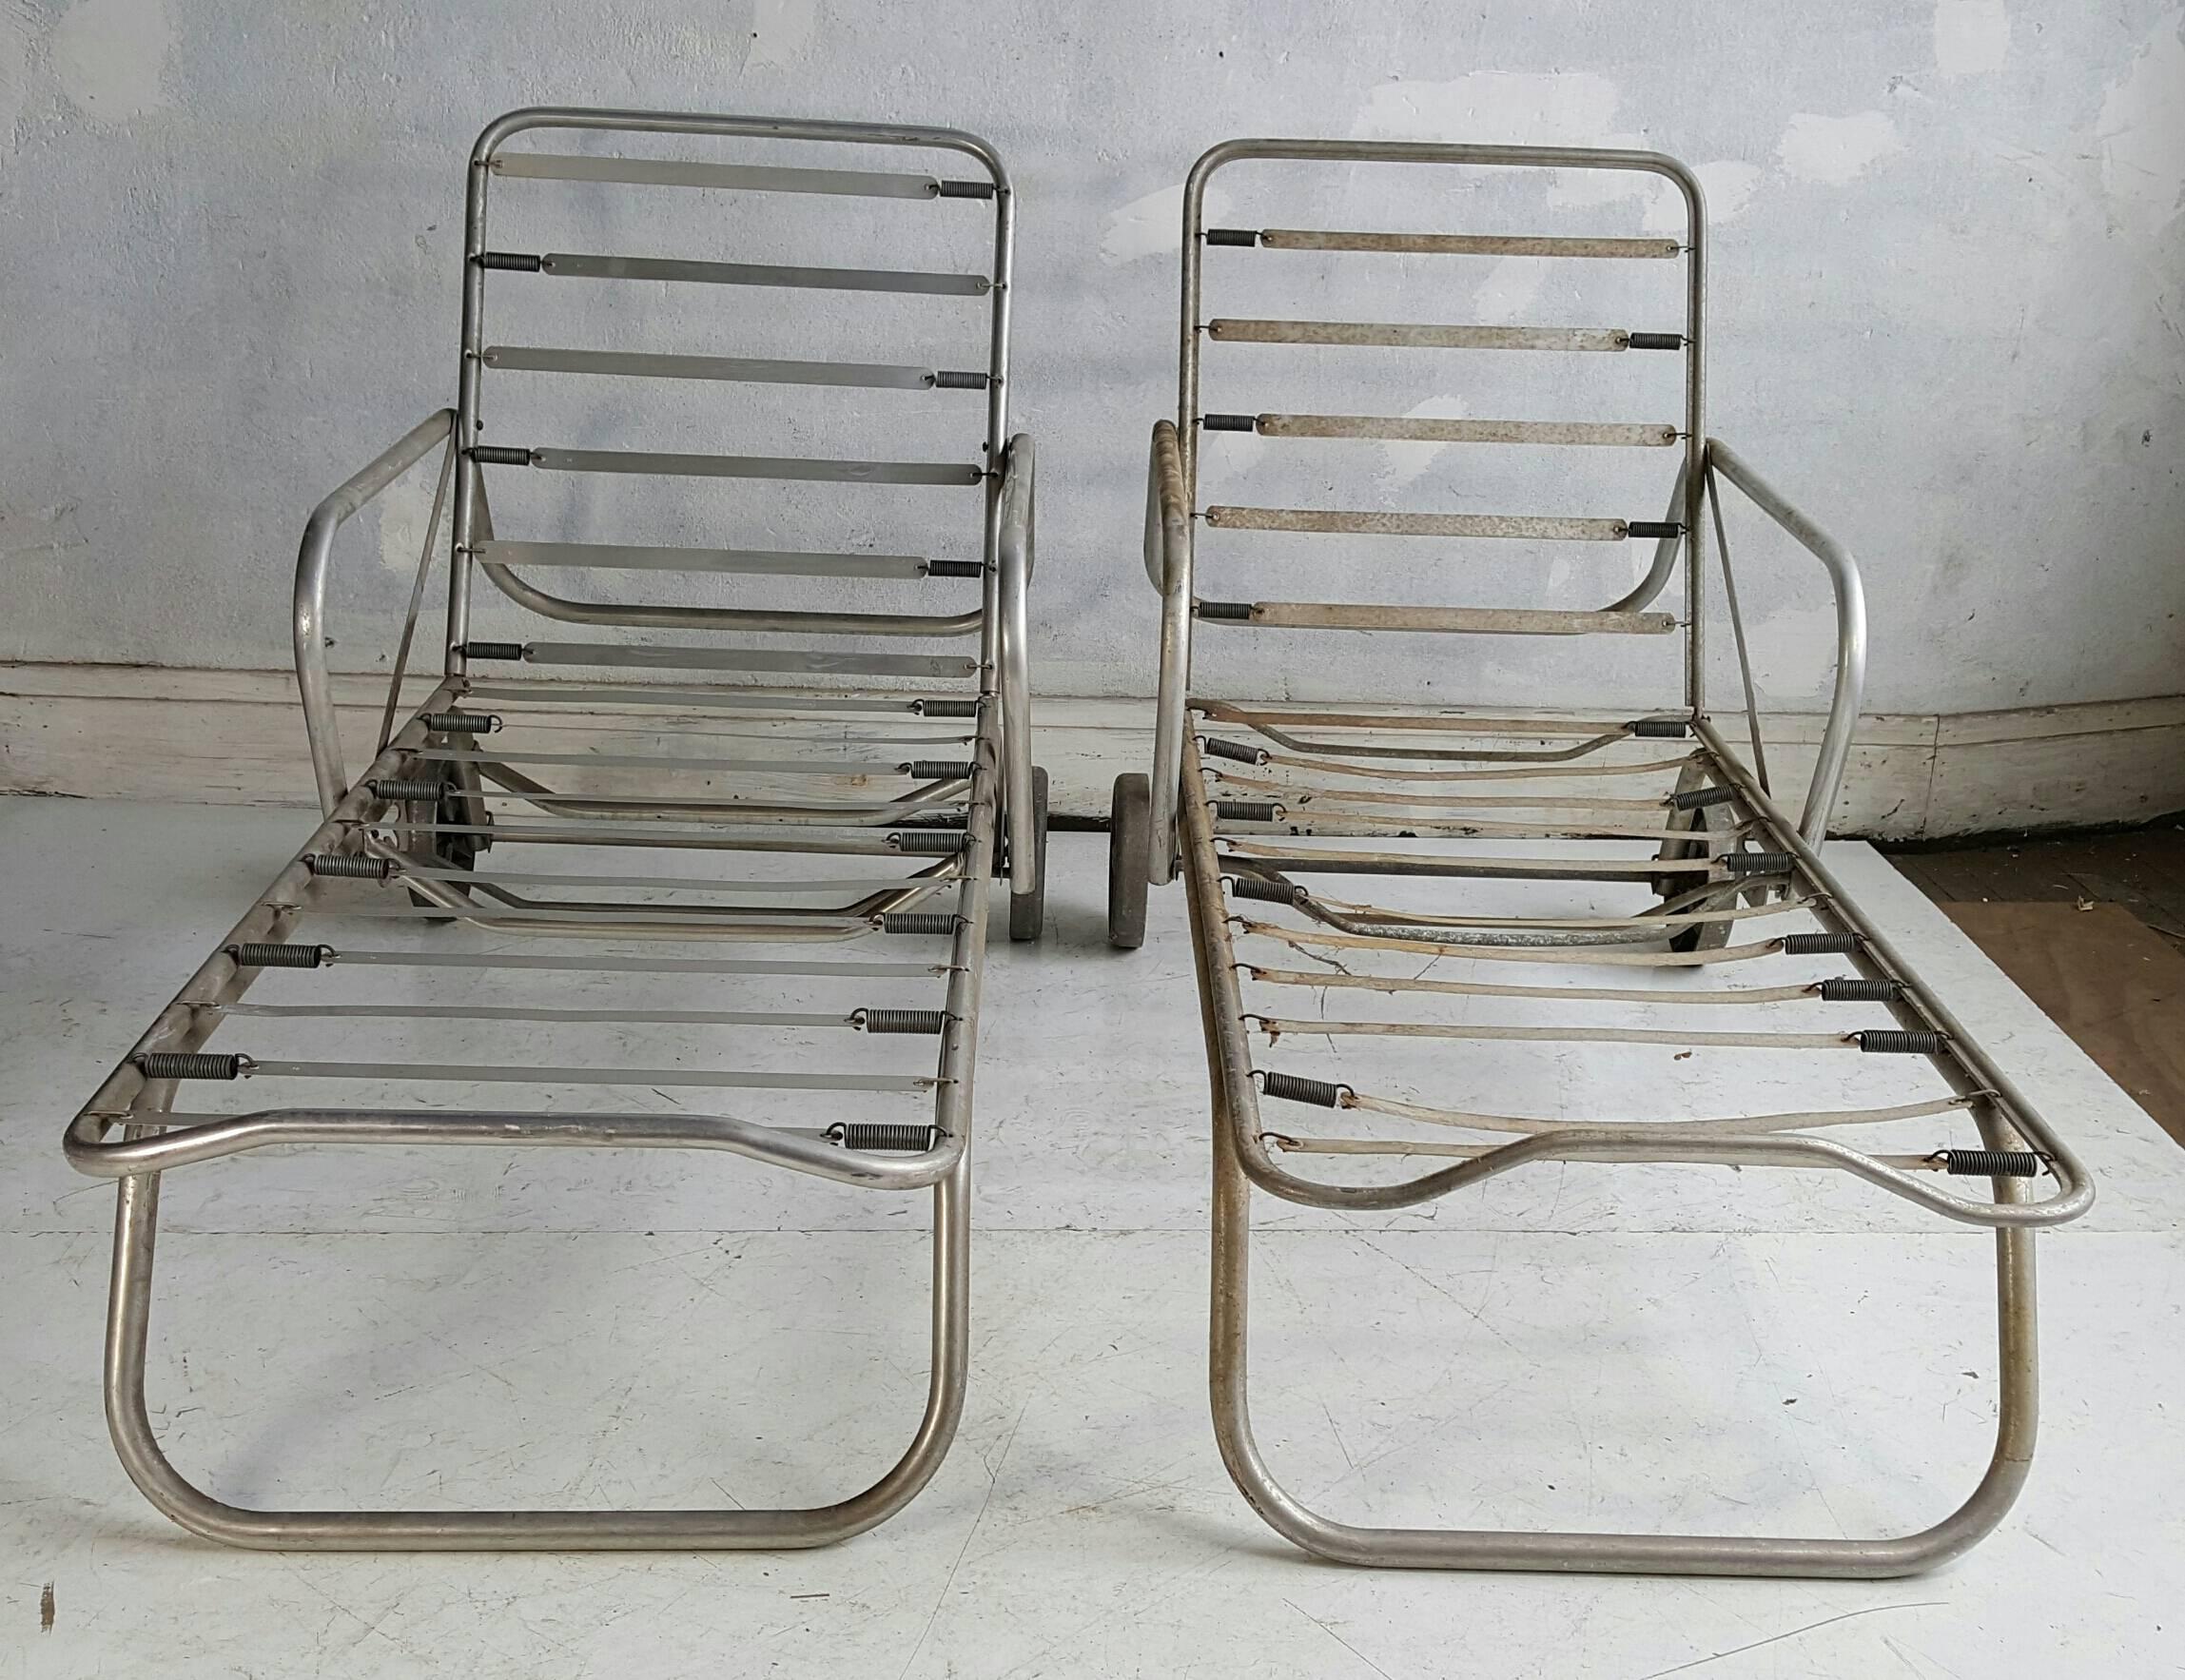 Pair of Machine Age or  Art Deco Aluminum Chaise Lounges for Outdoor Patio 1